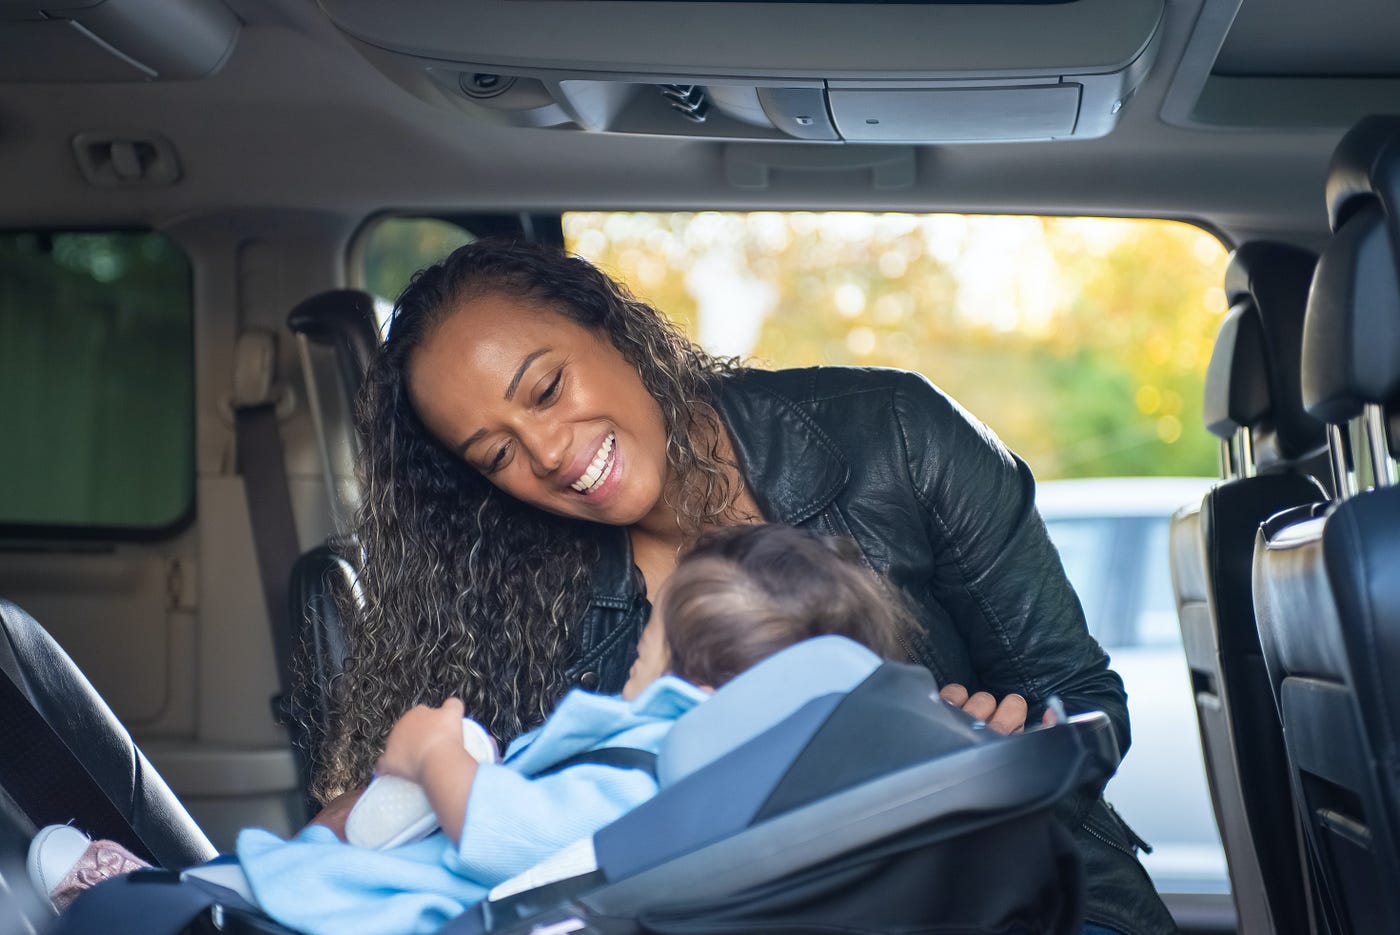 Types of Car Seats for Your Baby